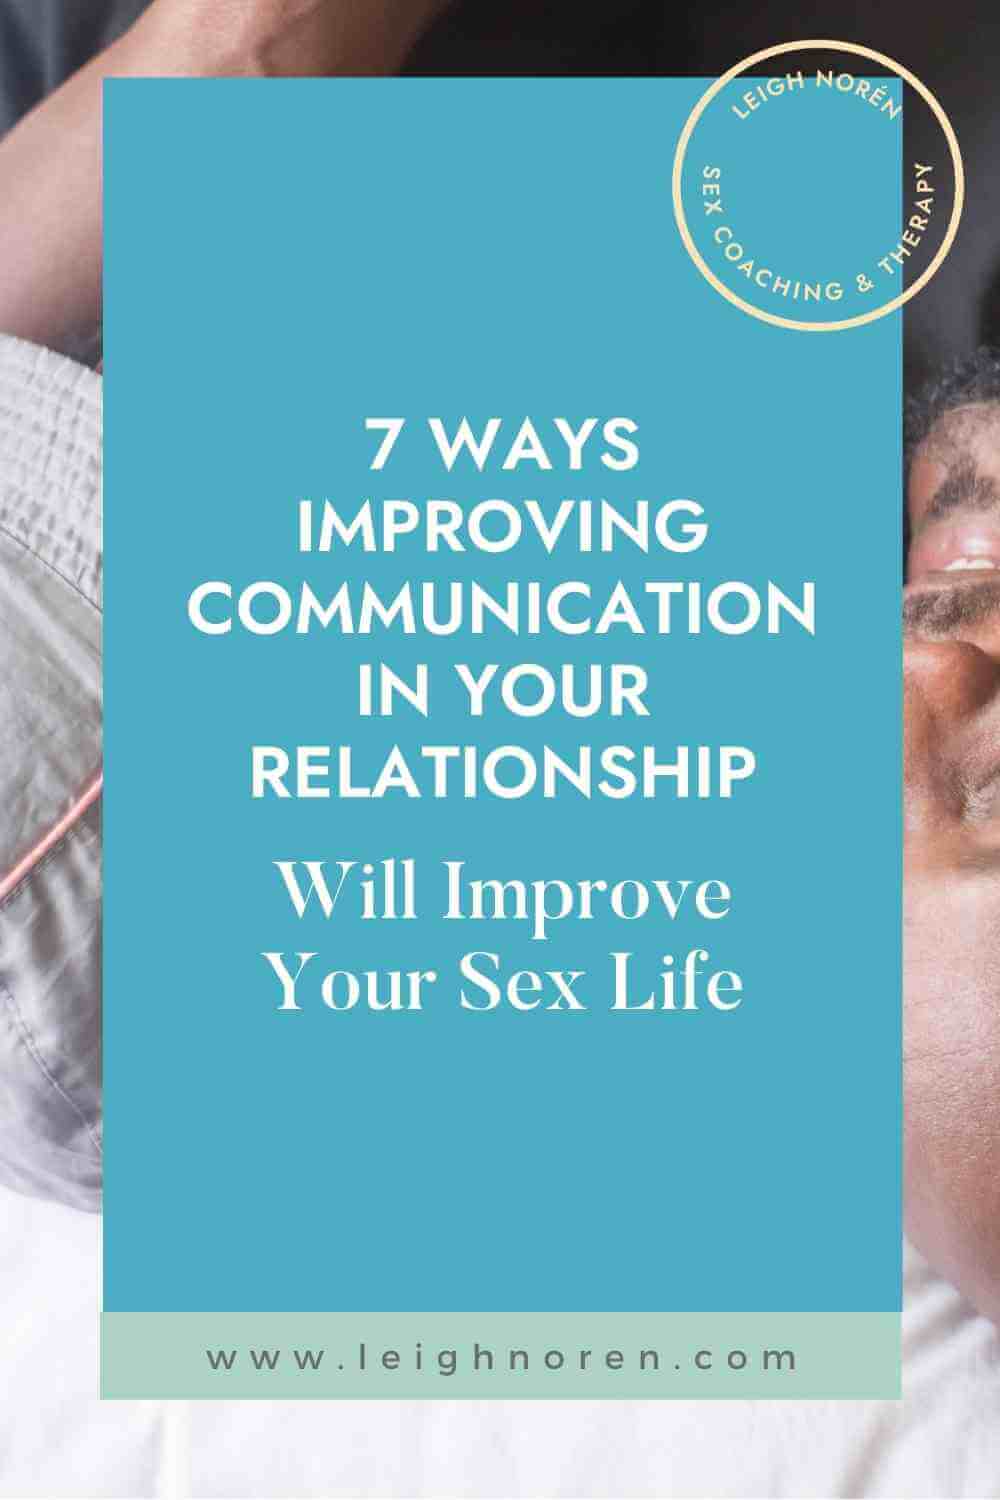 7 Ways Improving Communication In Your Relationship Will Improve Your Sex Life